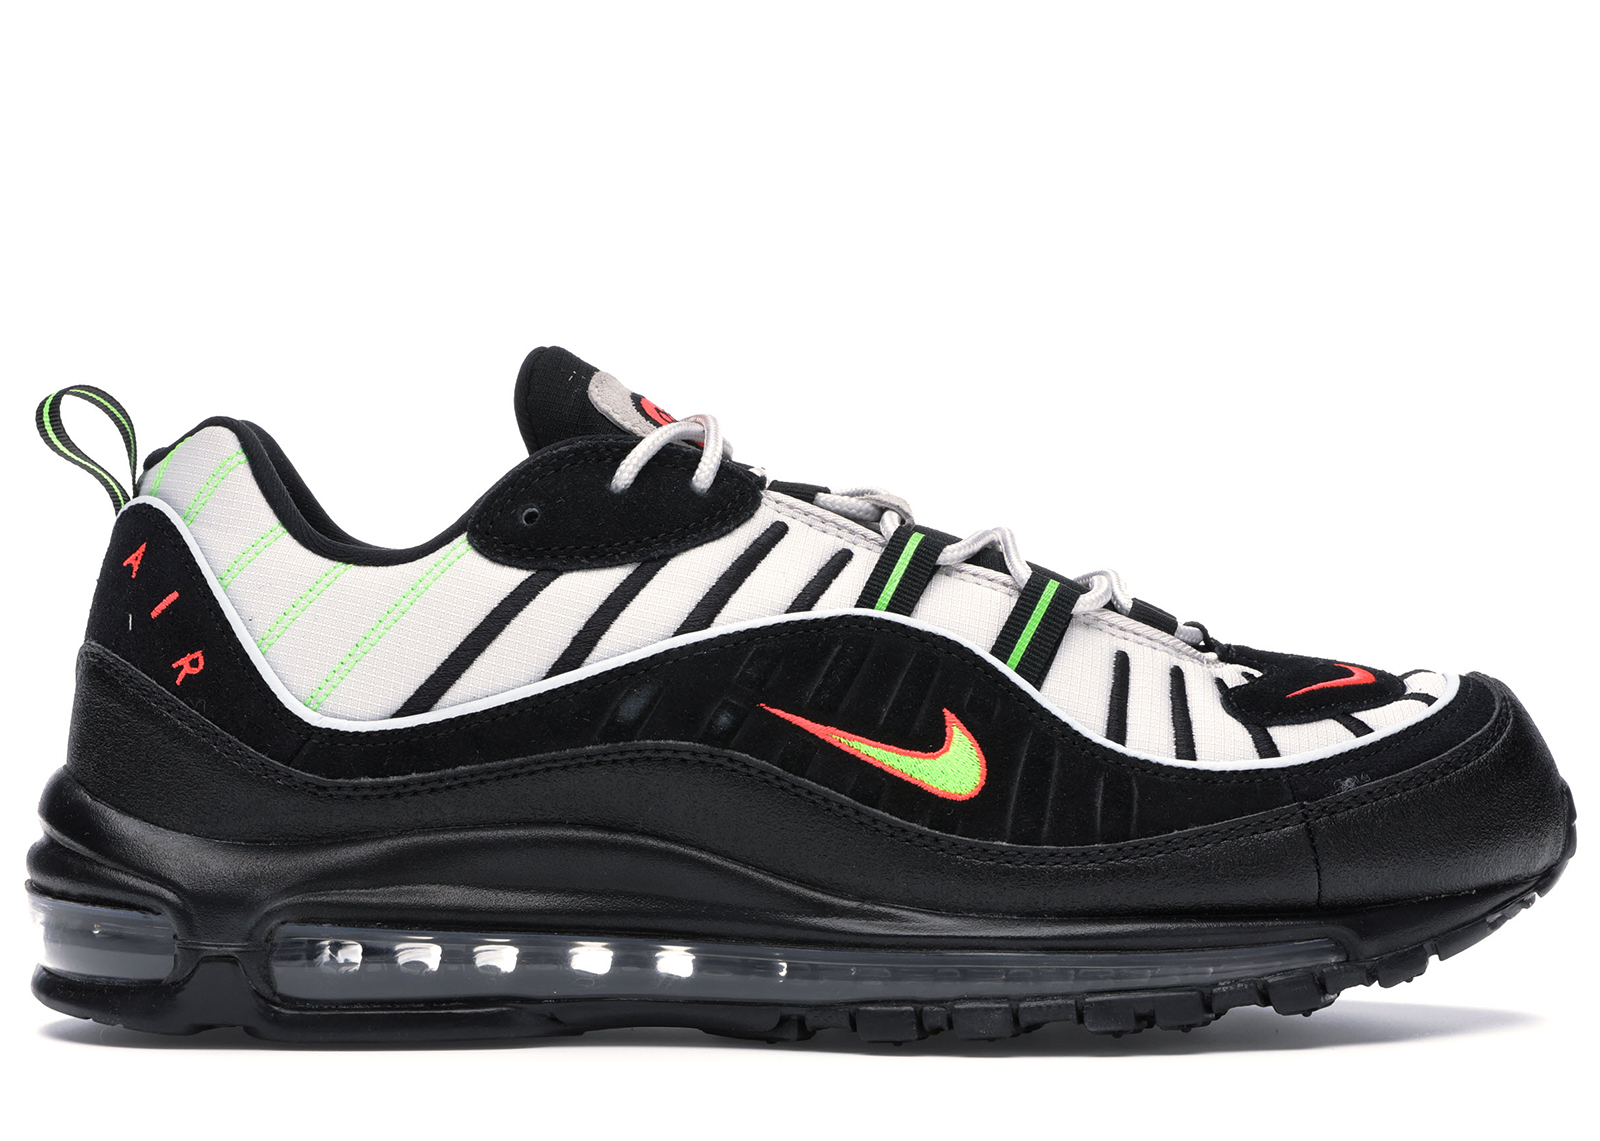 Buy Nike Air Max 98 Shoes & New Sneakers - StockX